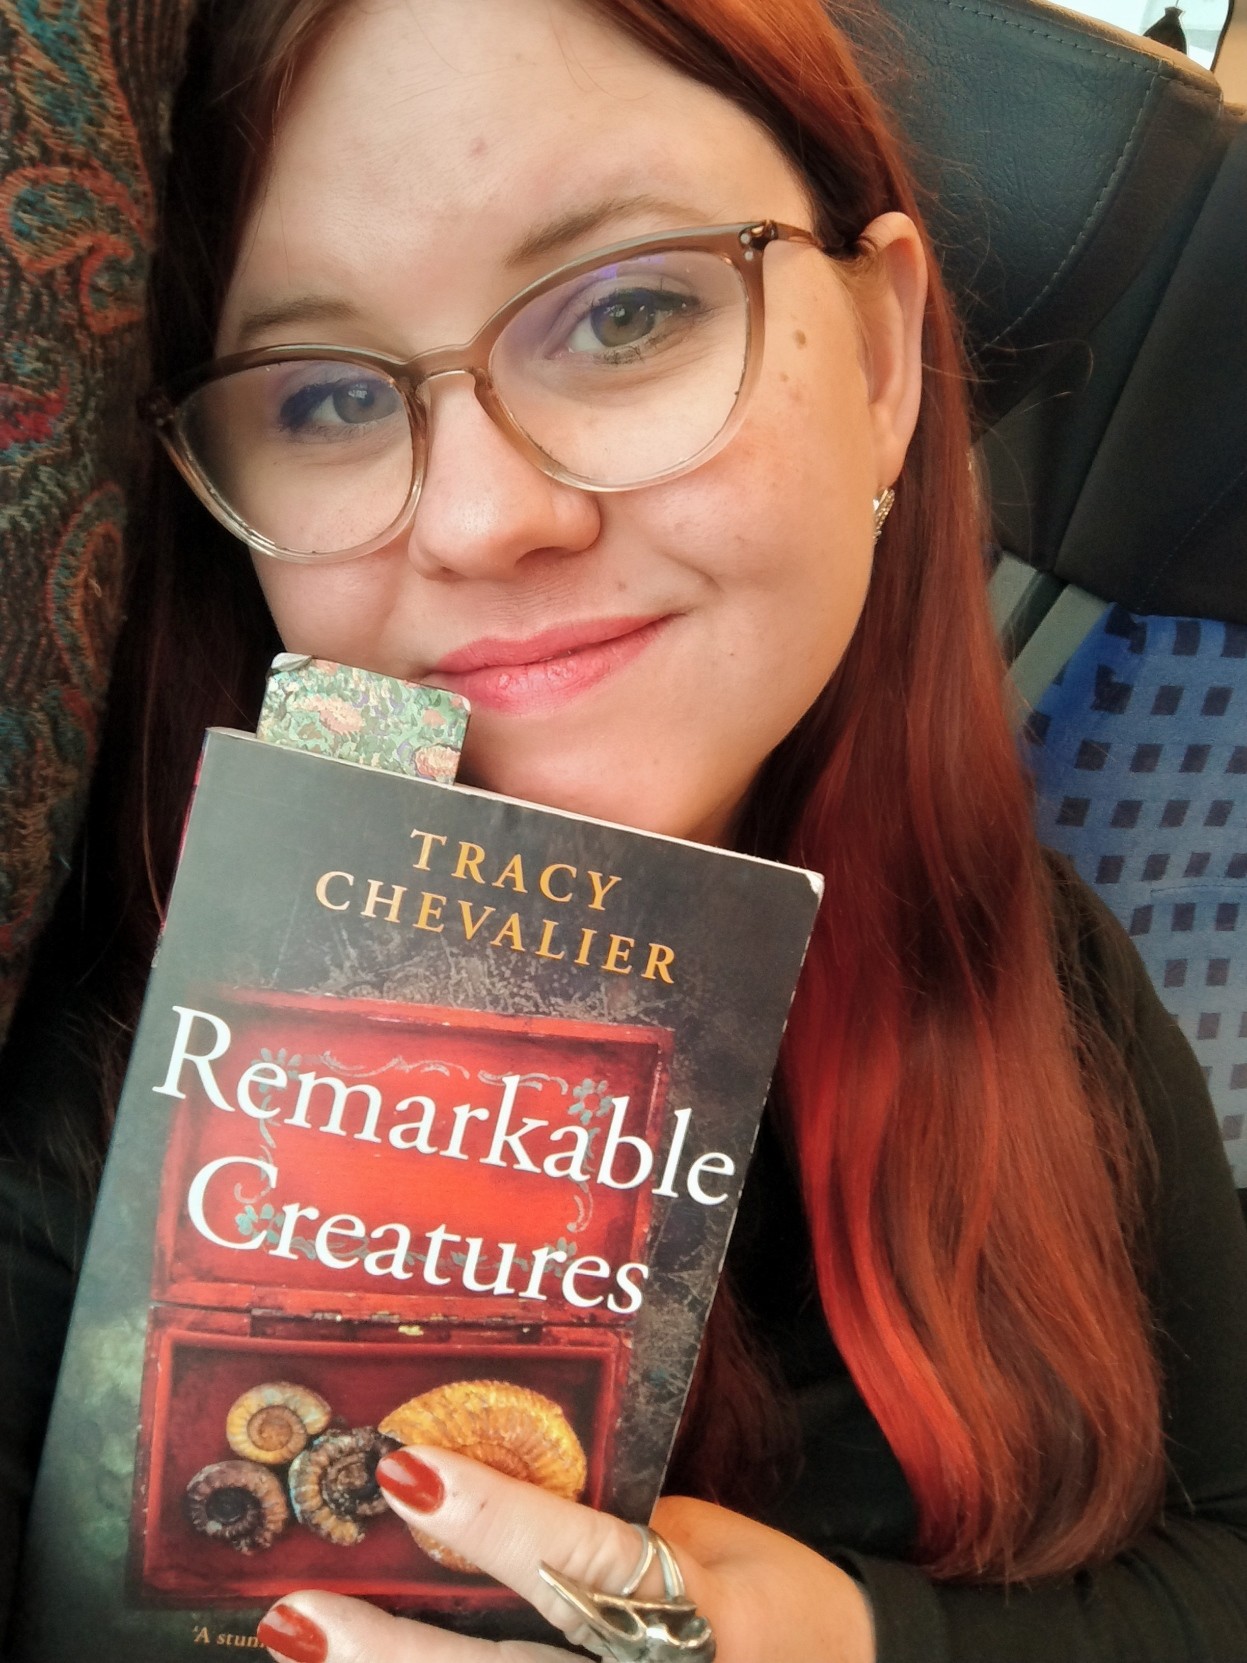 Me holding "Remarkable creatures" by Tracy Chevalier.